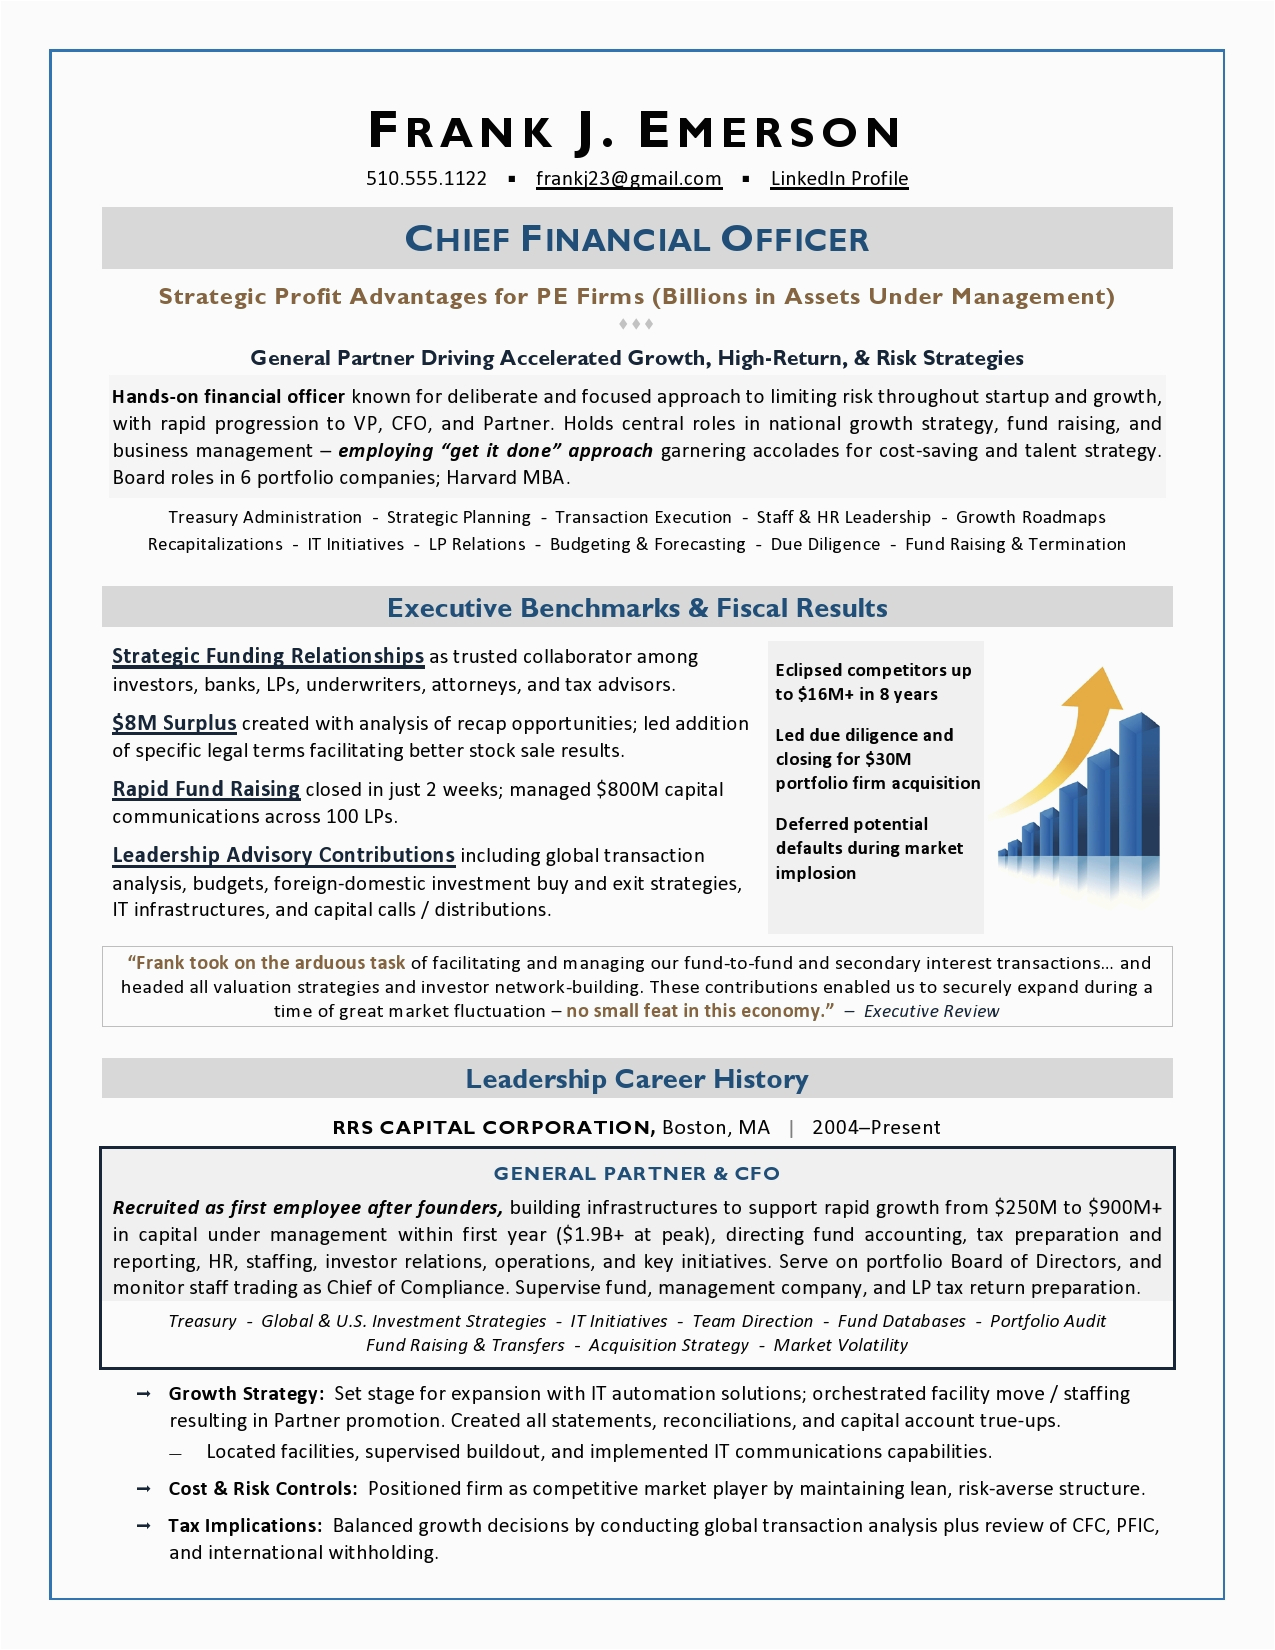 Private Equity Vice President Resume Sample Executive Resume Samples From Award Winning Resume Writer